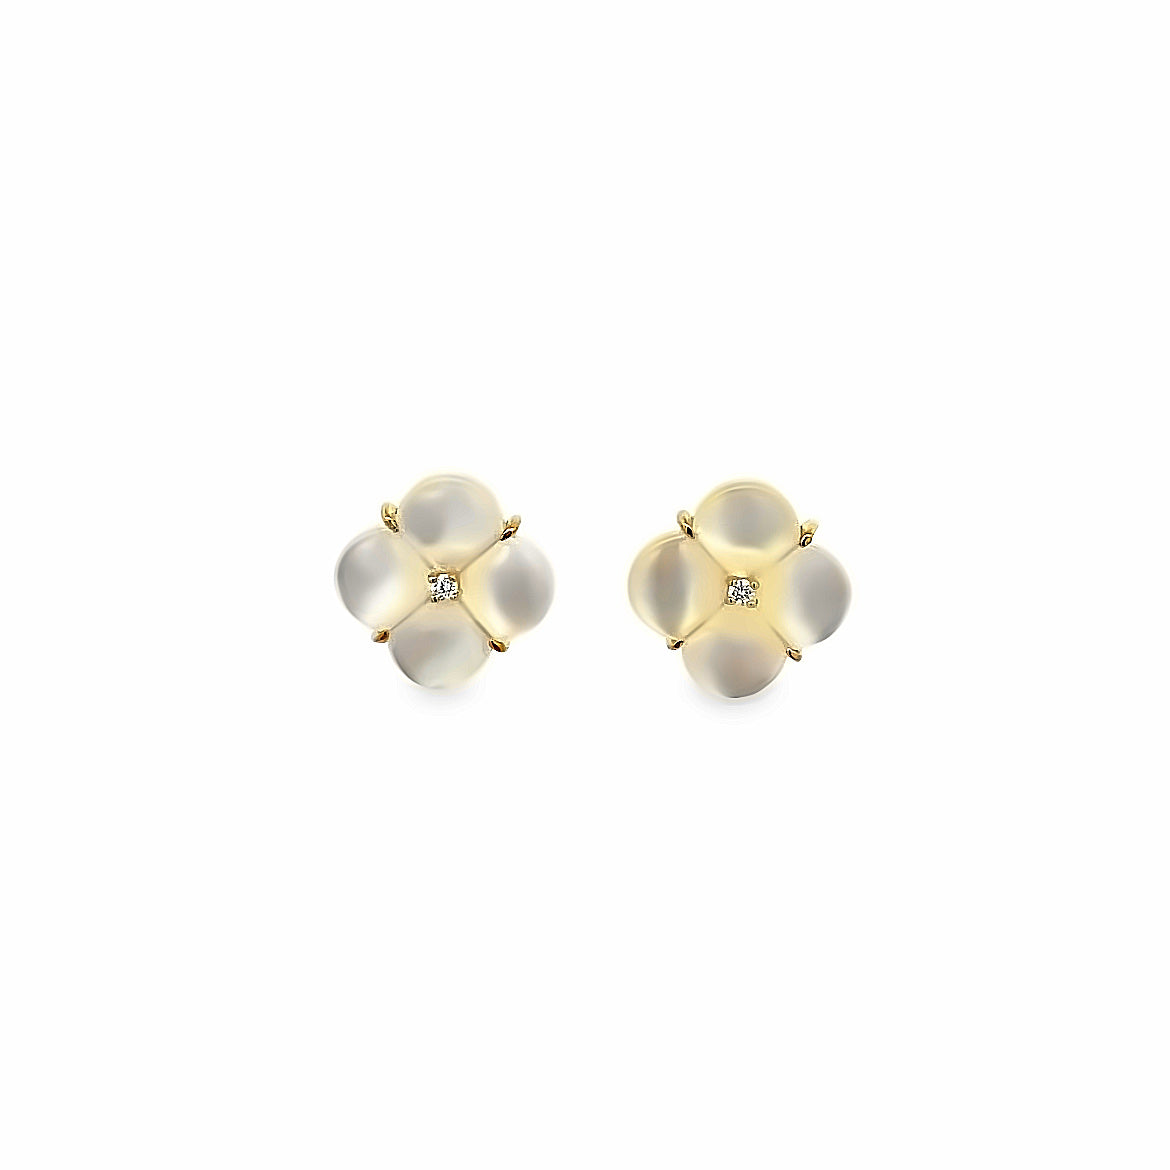 18K GOLD FLOWER MEDIUM EARRINGS WITH MOTHER OF PEARL